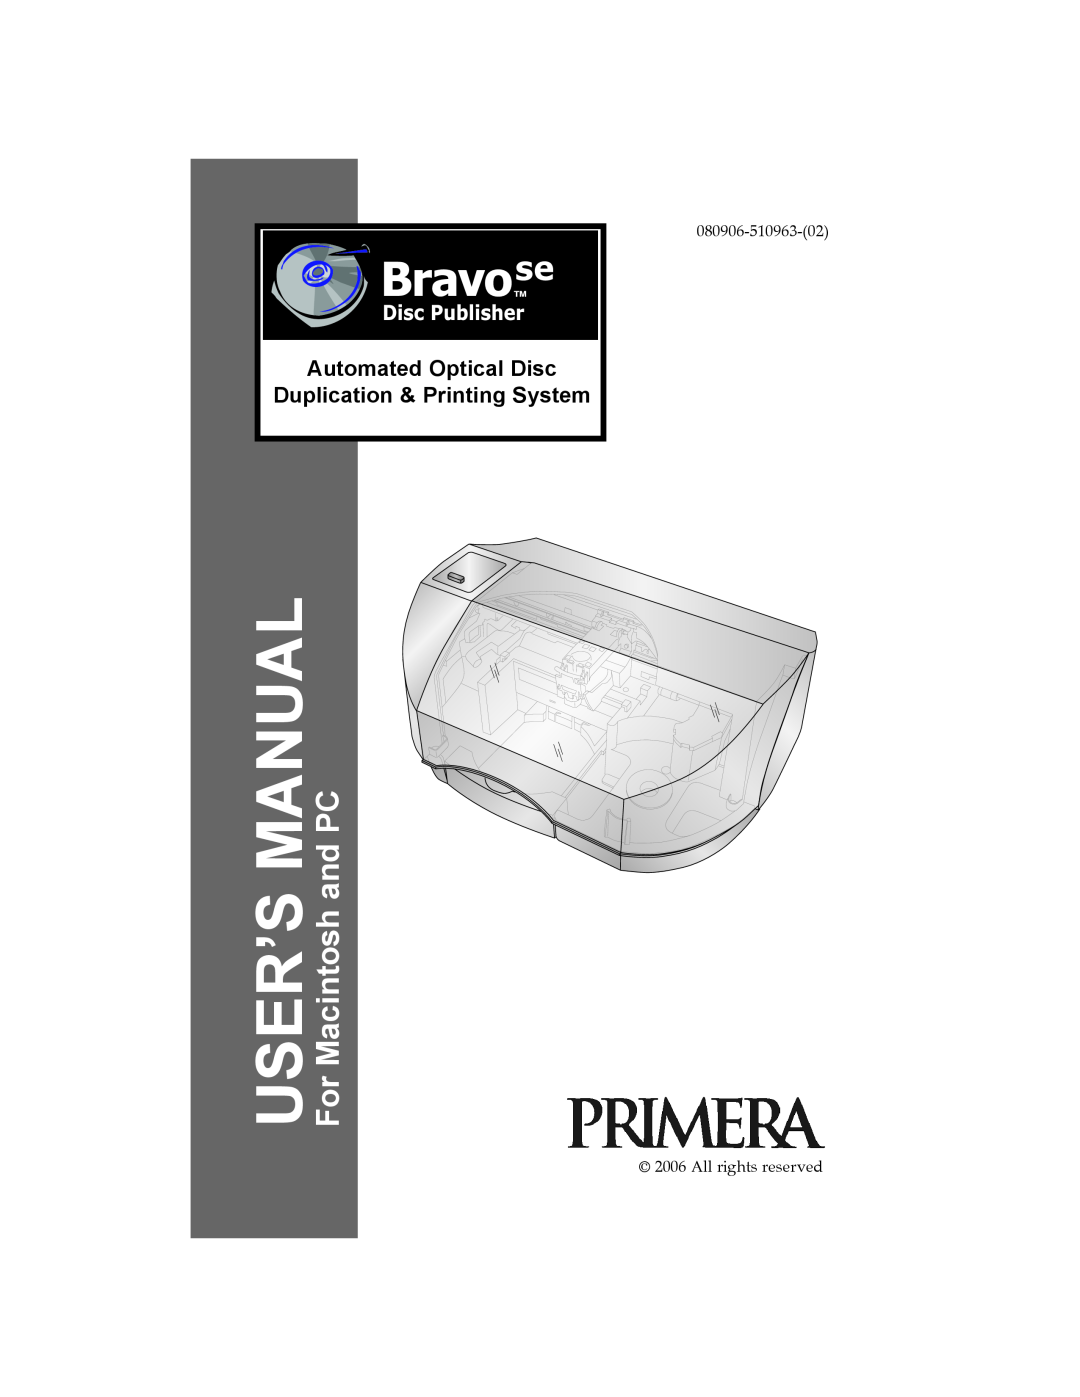 Primera Technology SE user manual For Macintosh and PC, Automated Optical Disc, Duplication & Printing System 